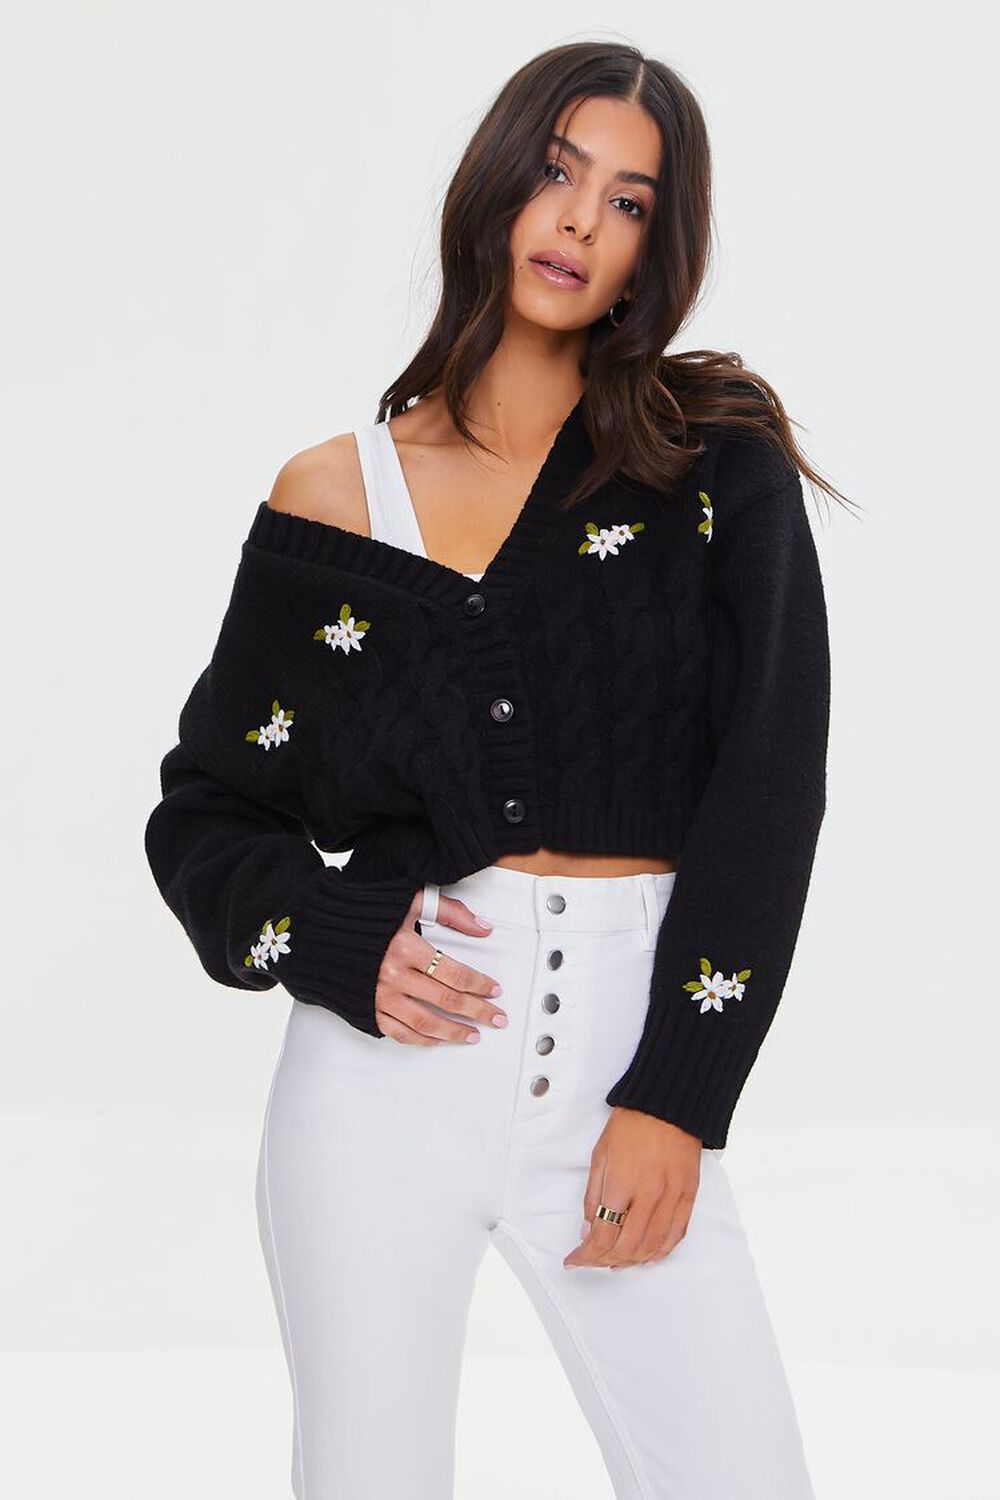 BLACK/MULTI Embroidered Floral Cardigan Sweater, image 1